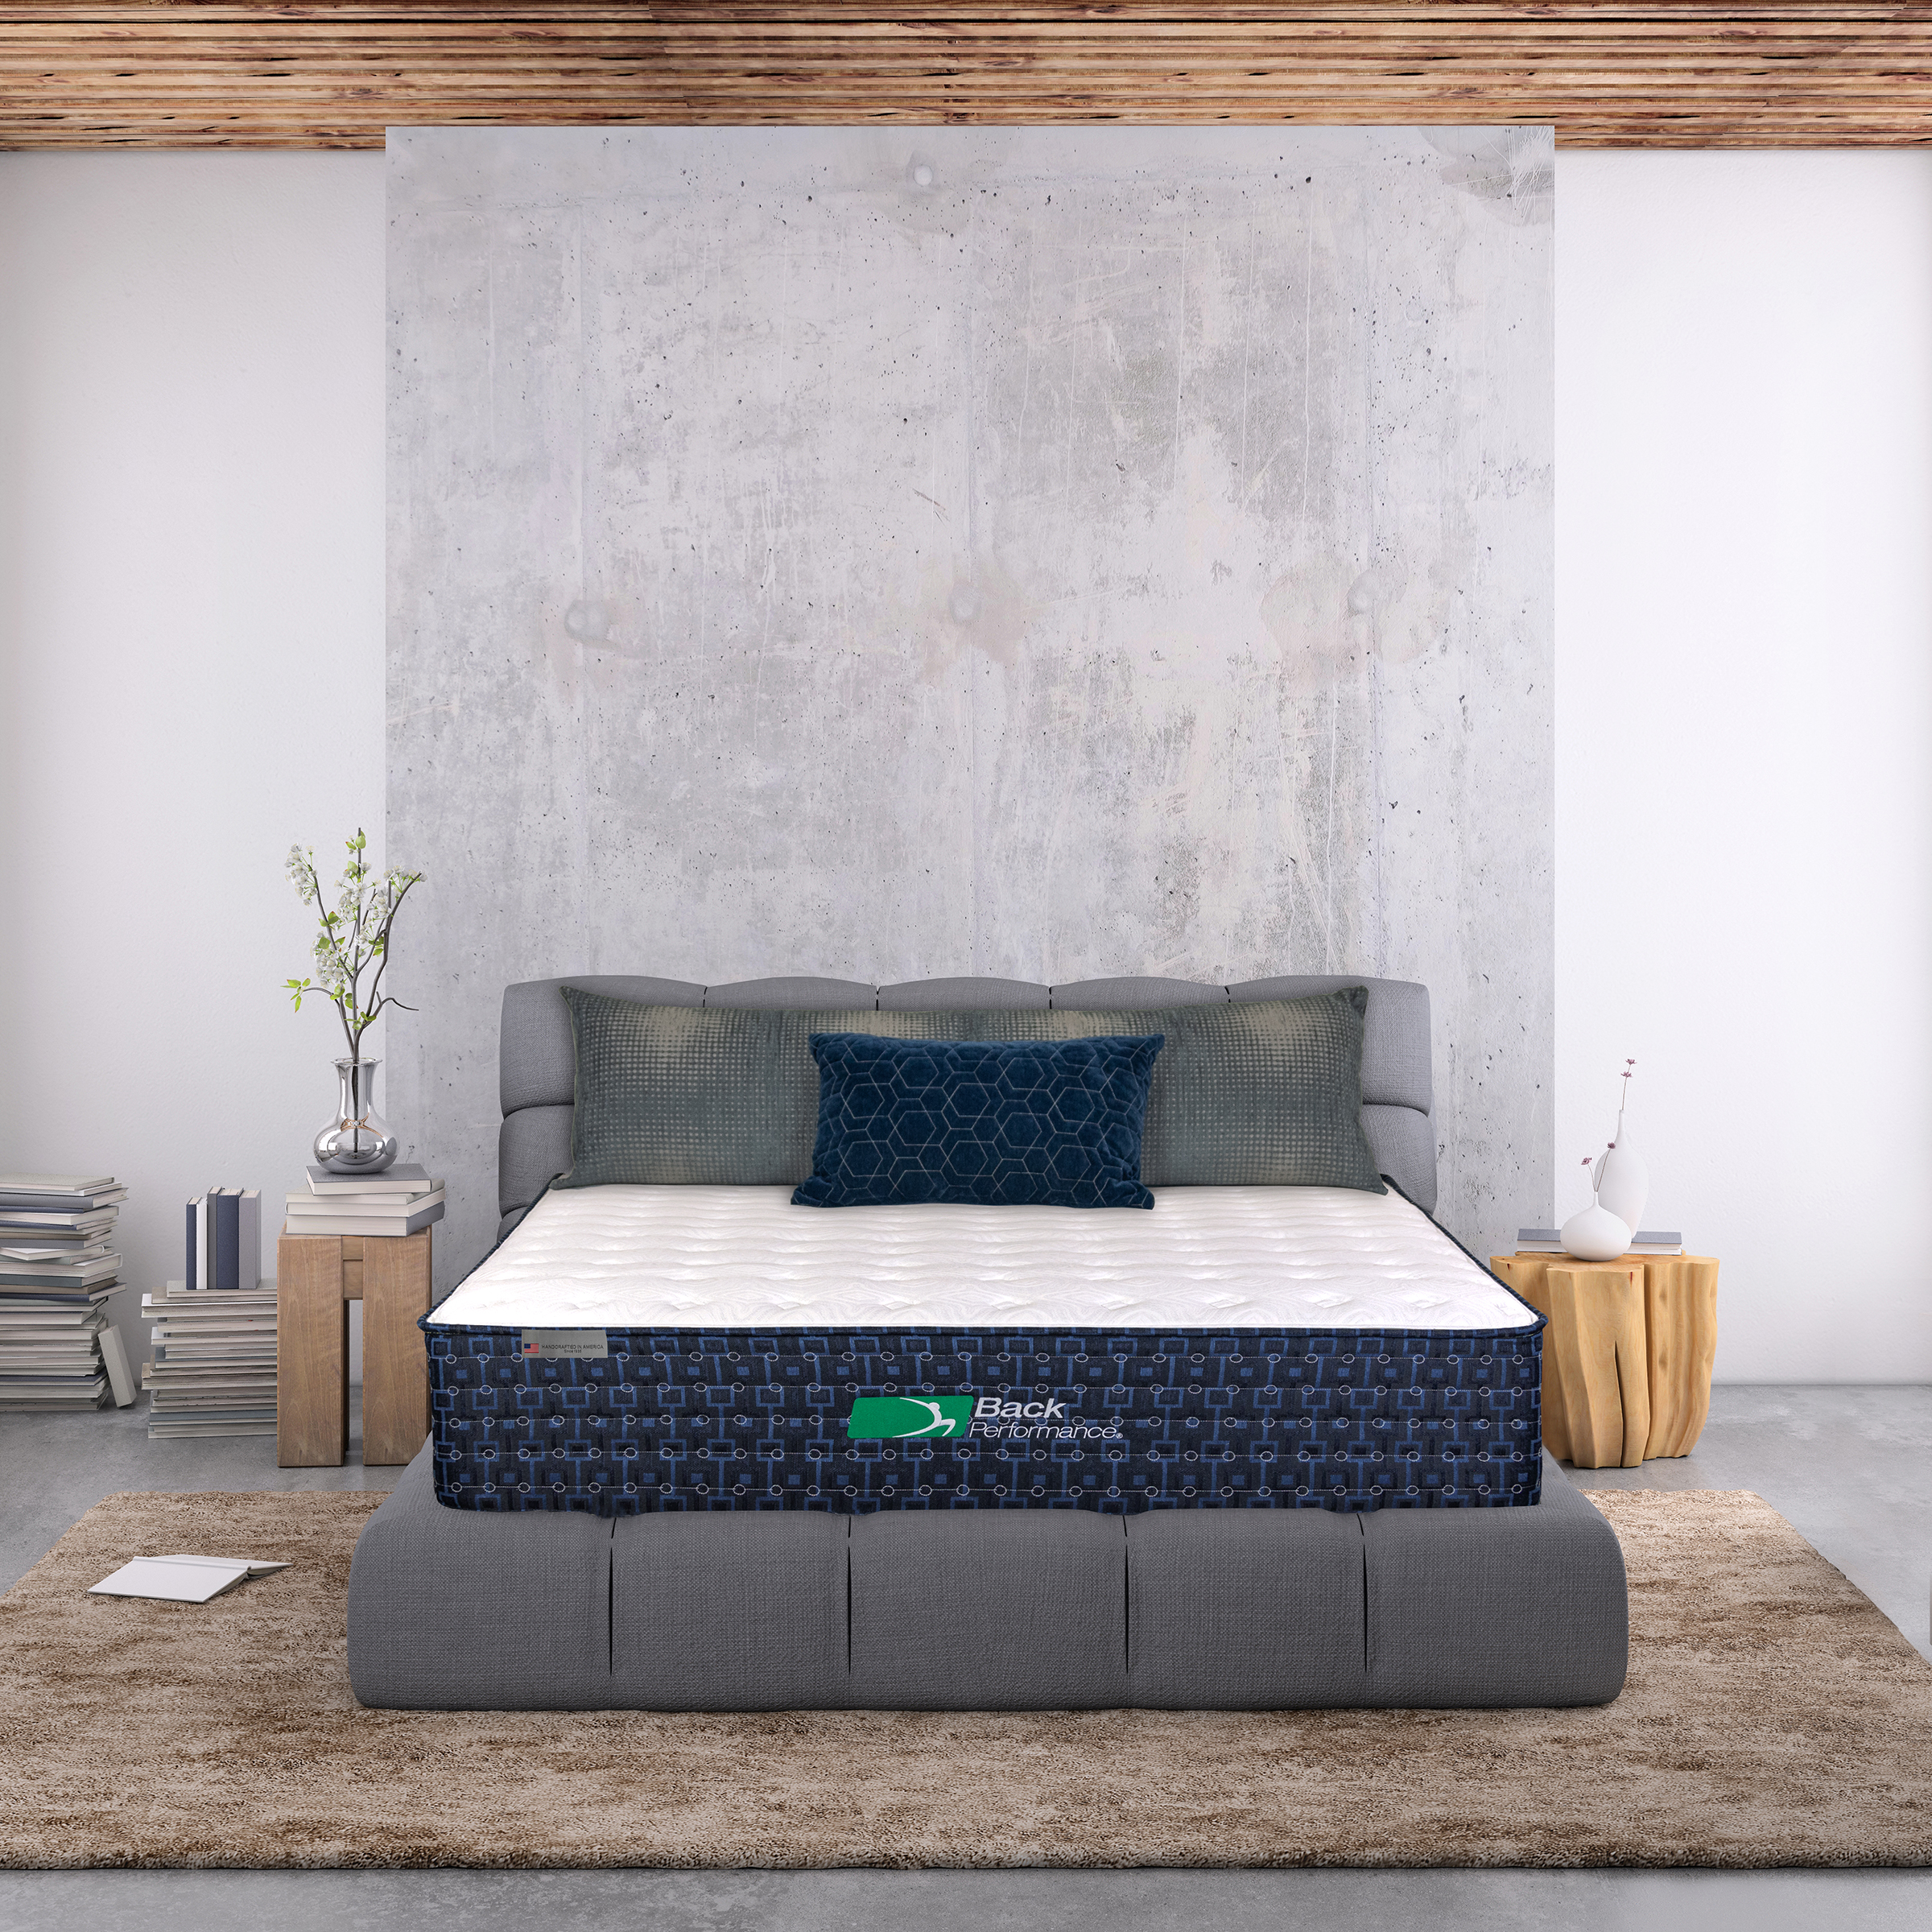 Modern bedroom interior, with bed, night tables, lamps, and many details around. Many books and decoration, wall is rich in texture. Copy space background template render